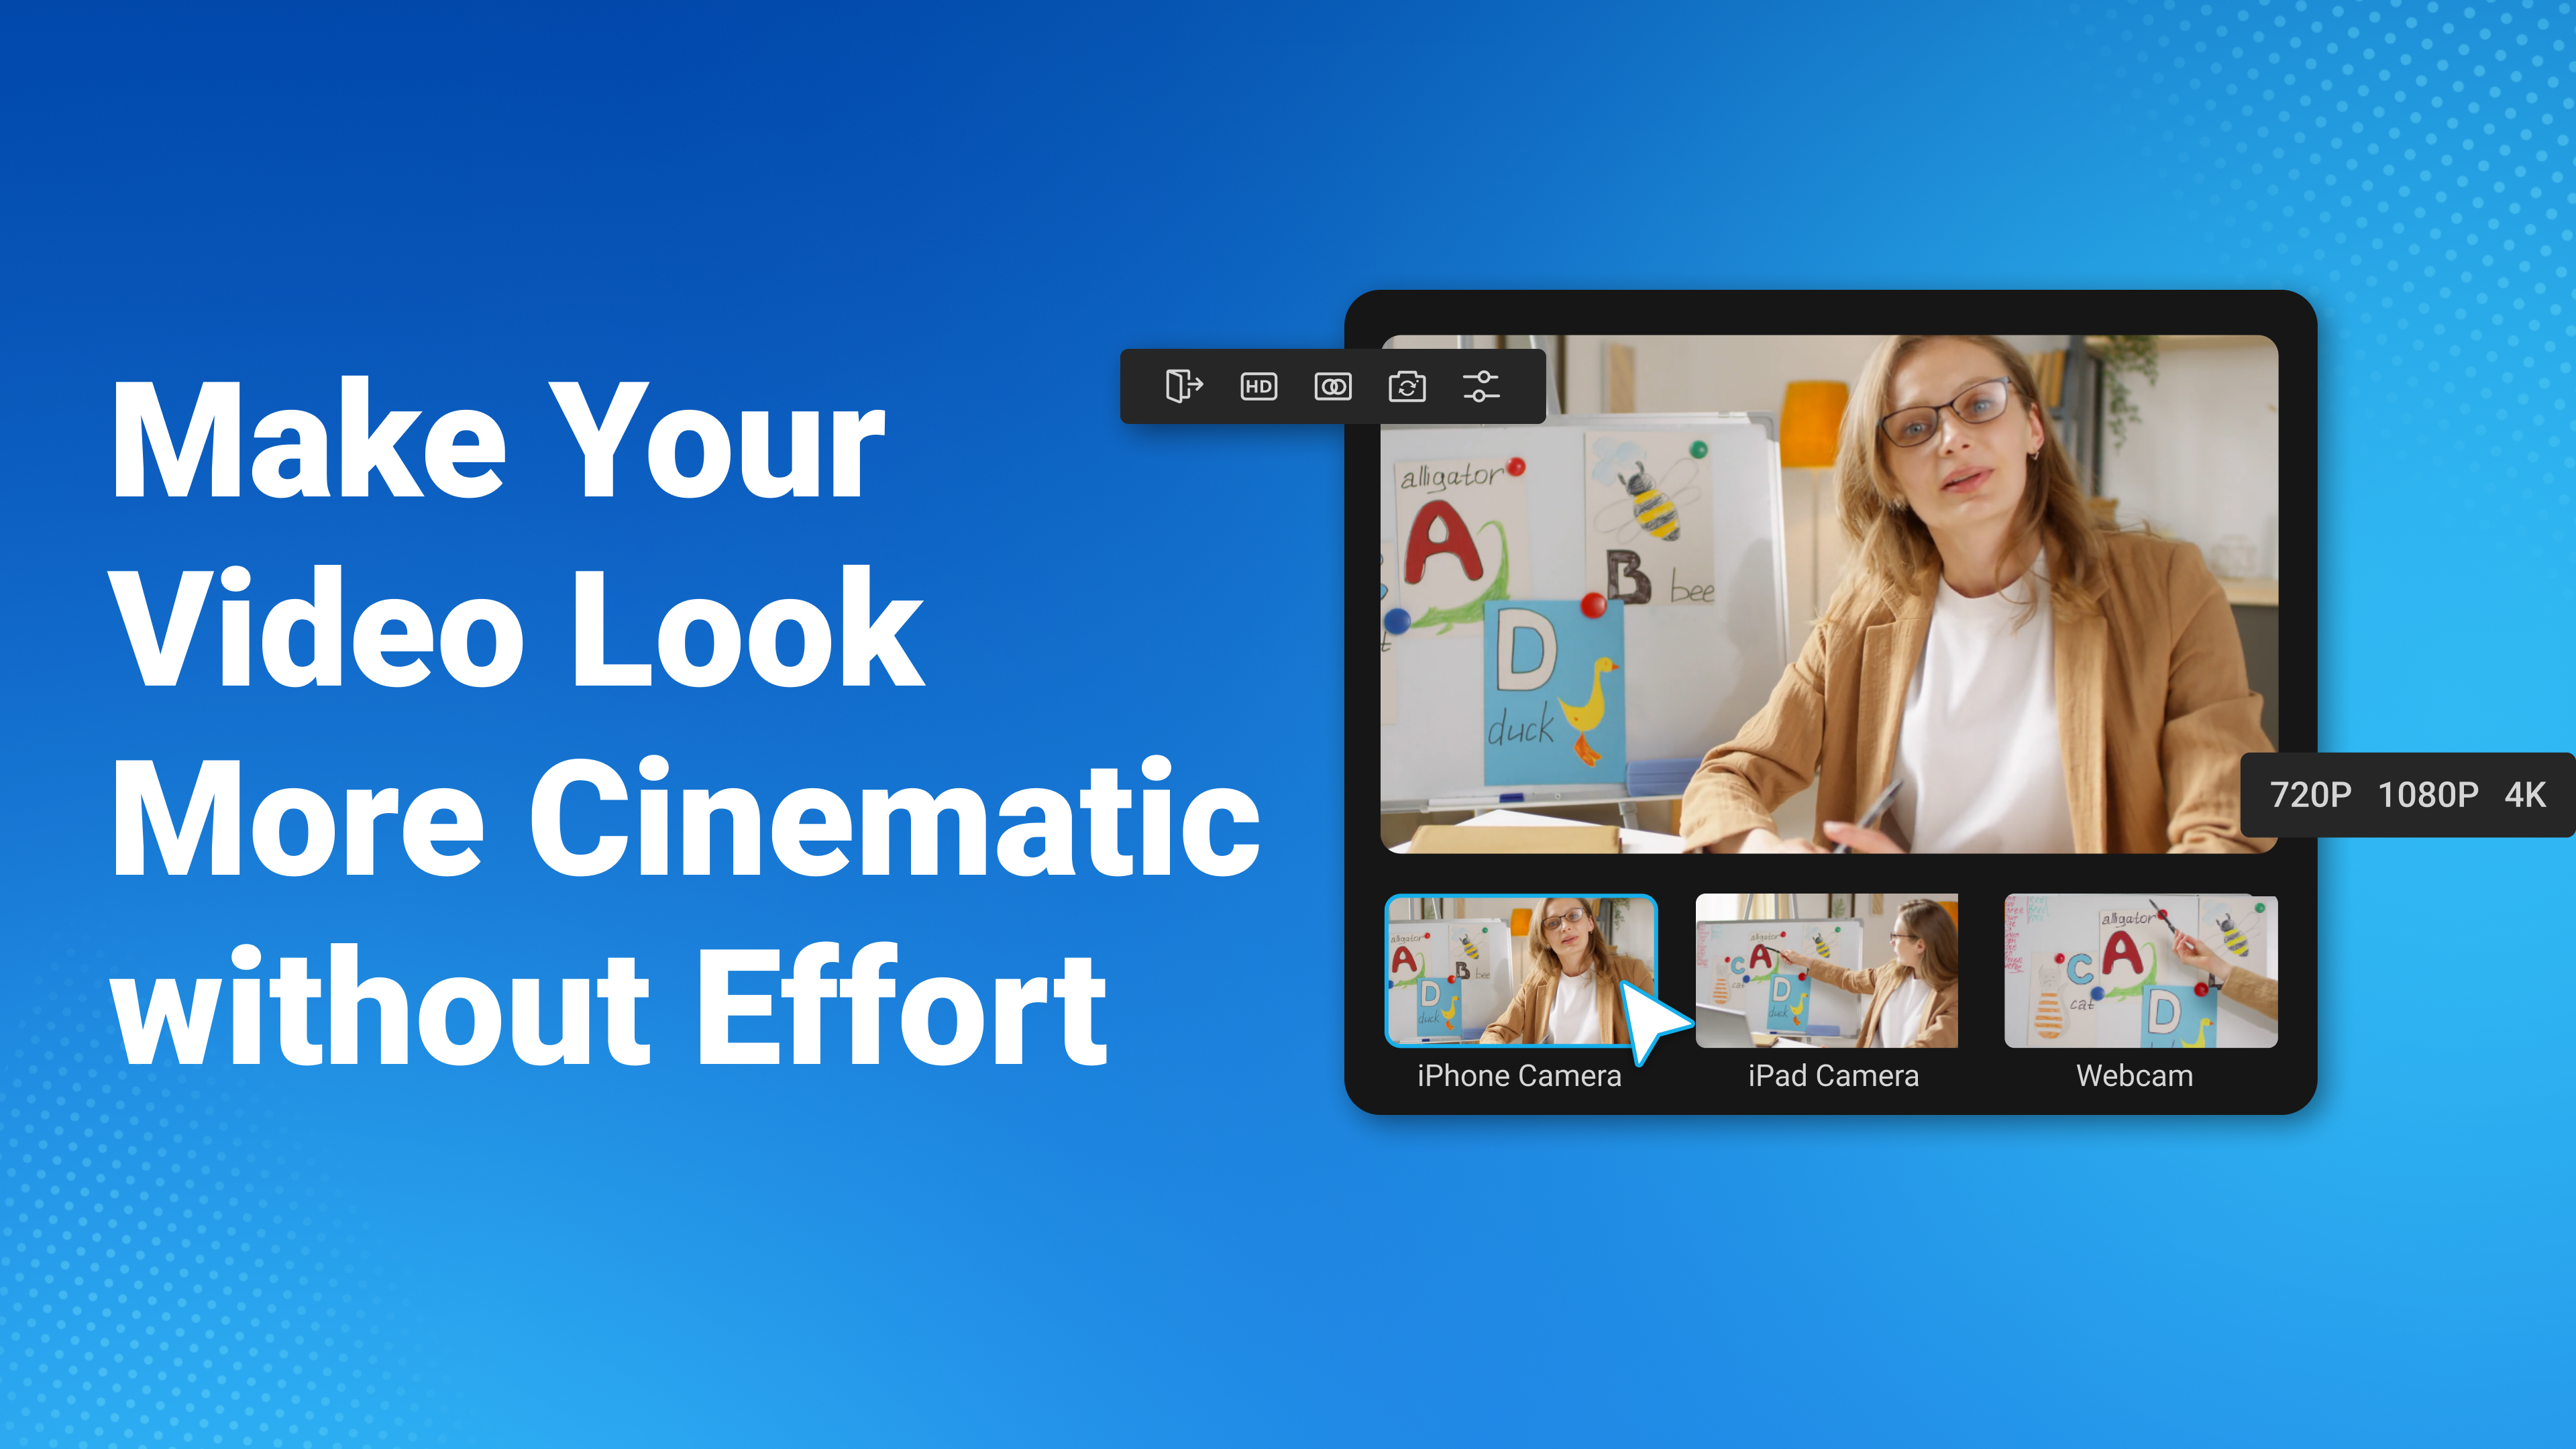 Make Your Video Look More Cinematic without Effort